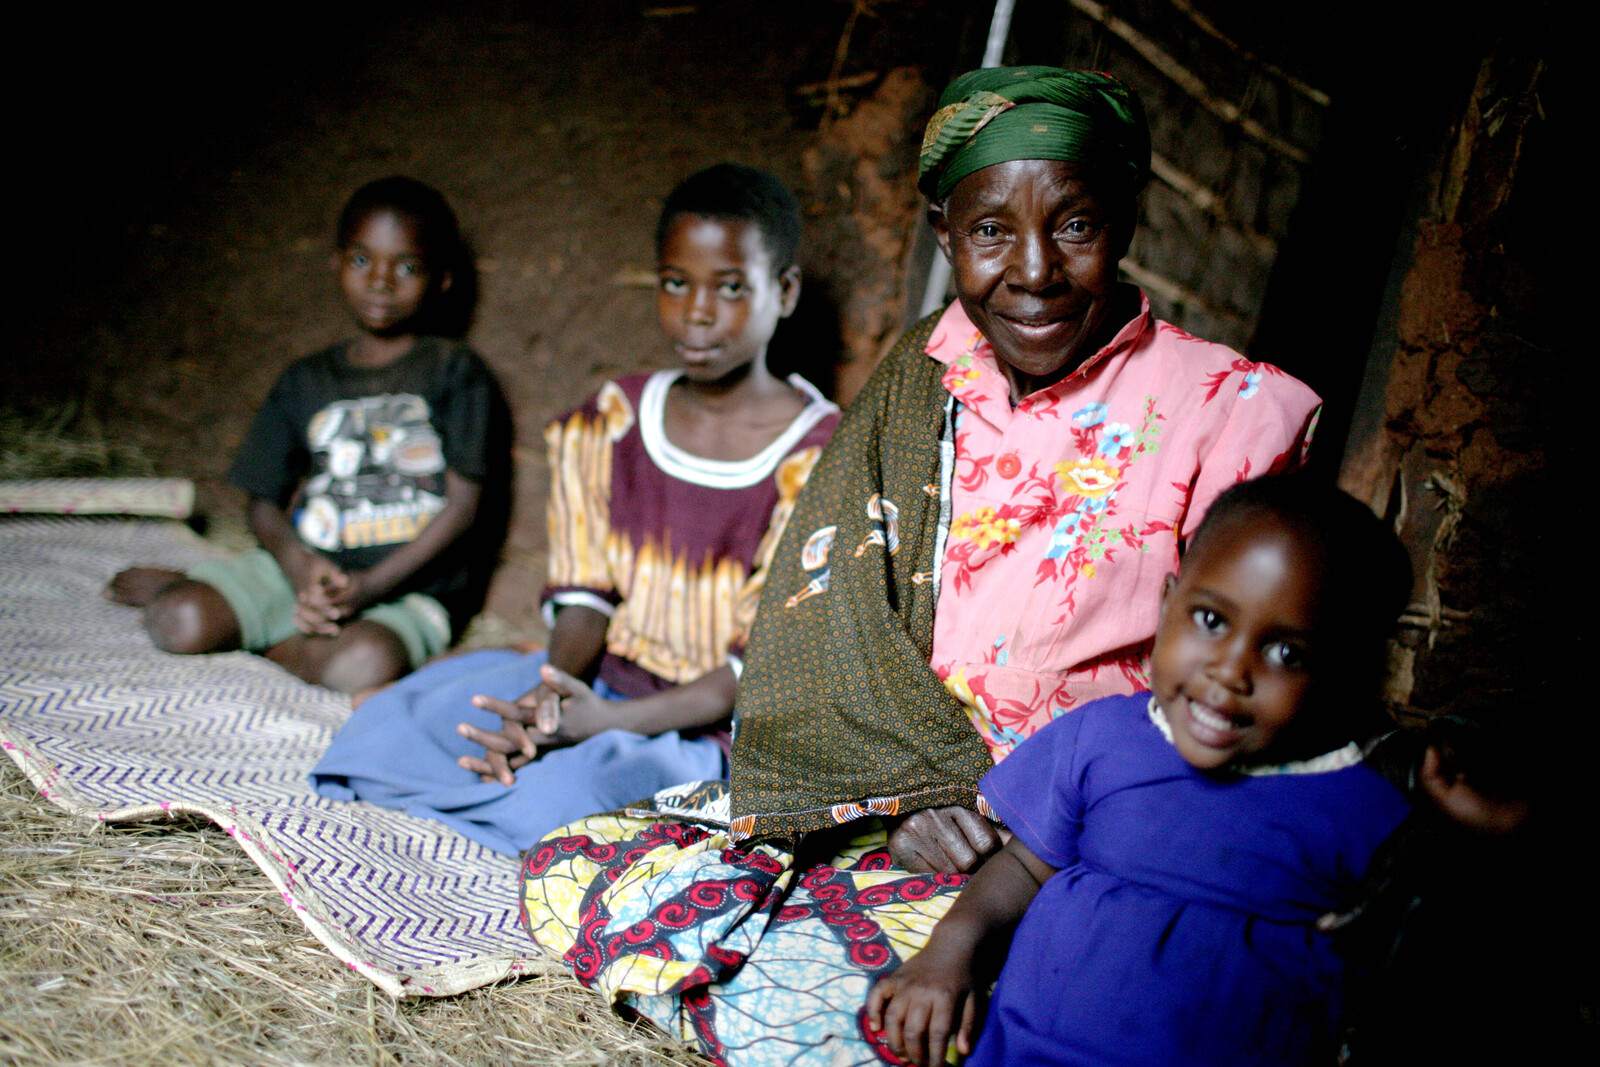 Together with small children, an old woman is sitting on the ground. 